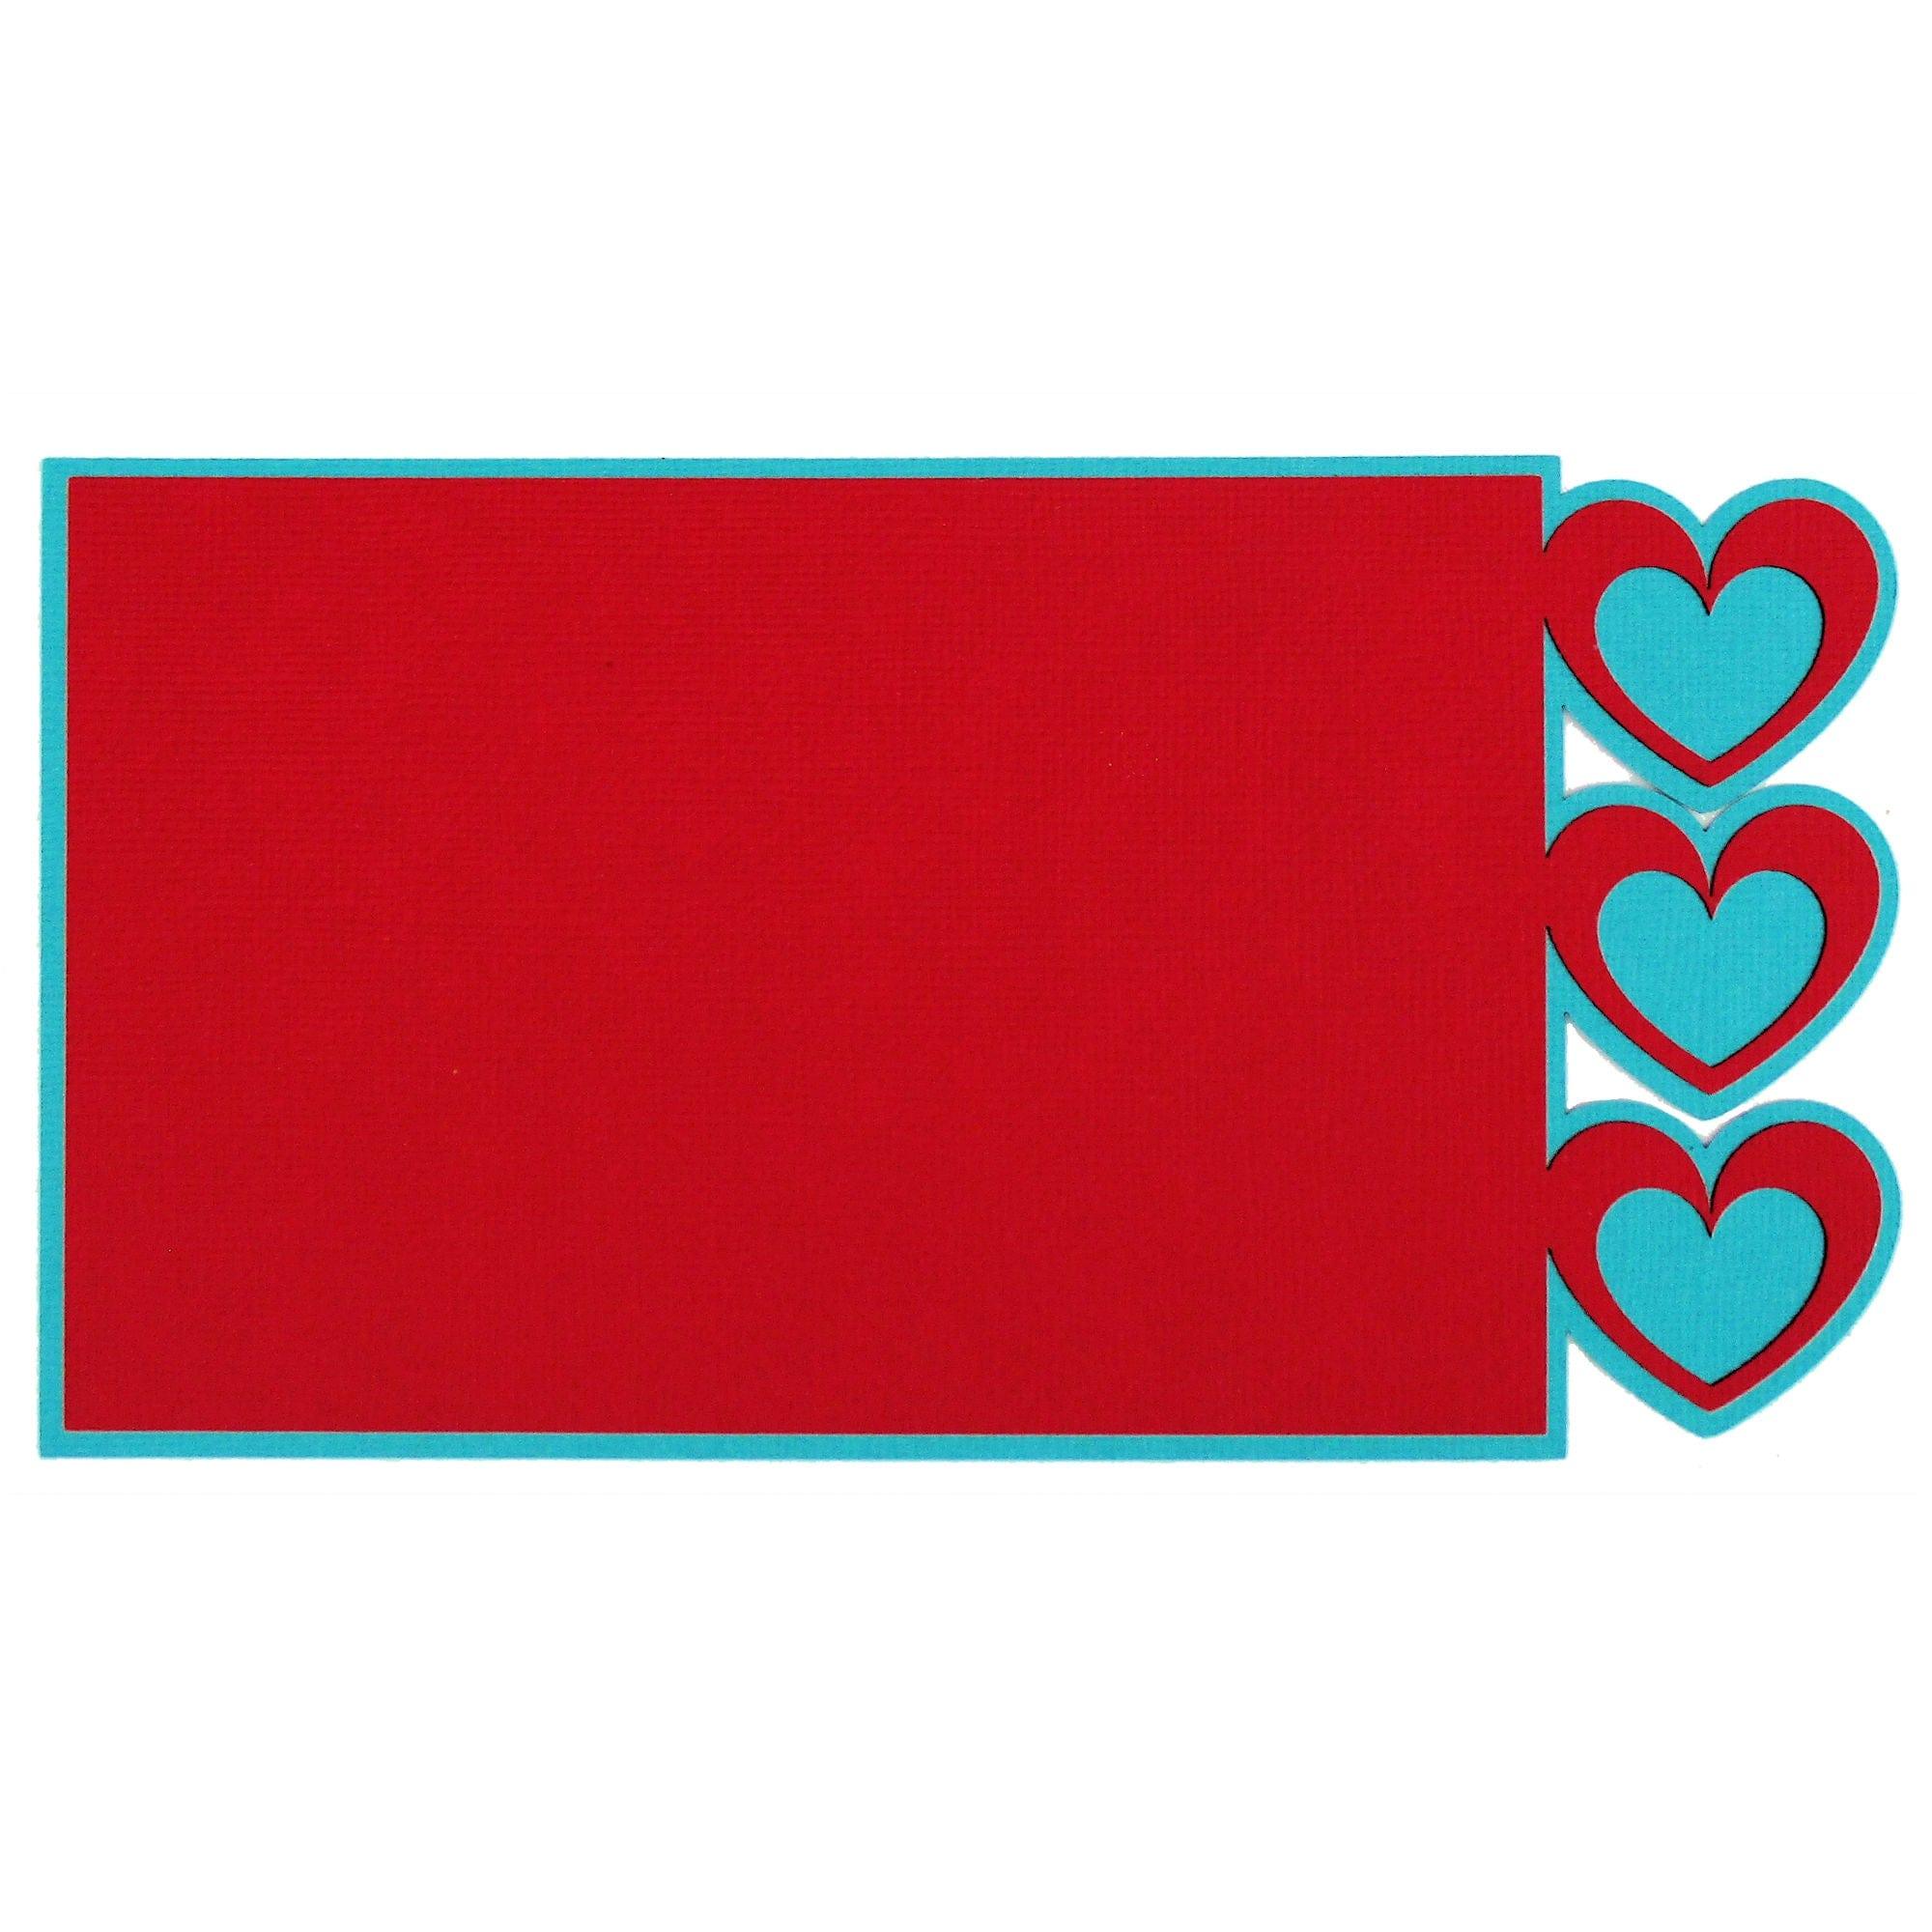 Hearts Red on Teal 4.25 x 6.25 Laser Cut Scrapbook Photo Mat Frame by SSC Laser Designs